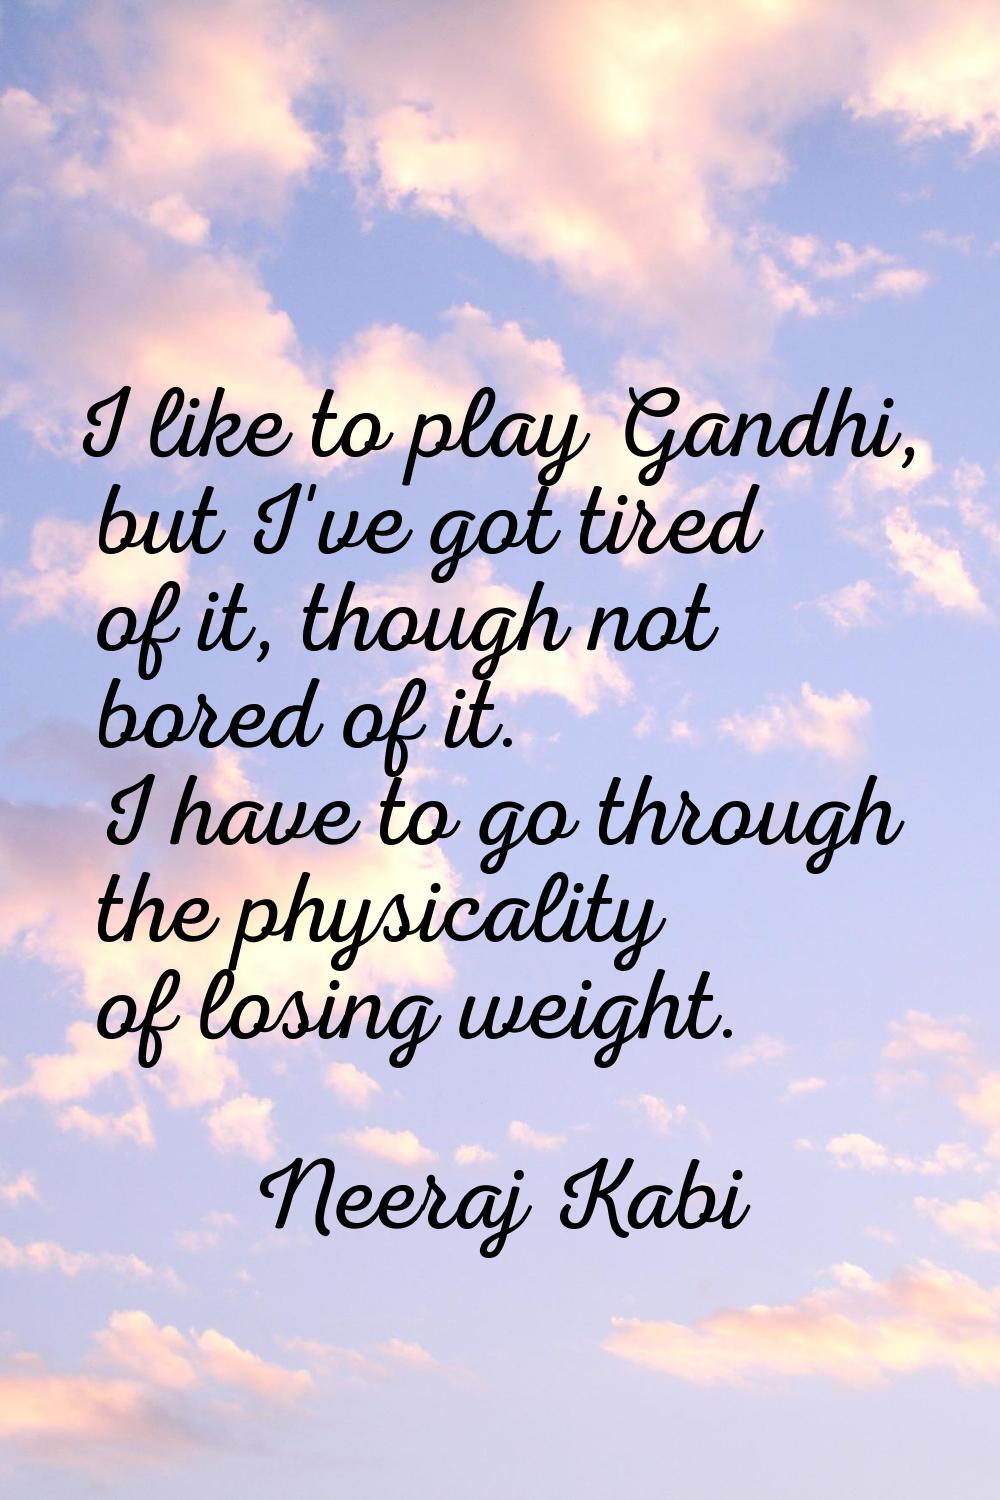 I like to play Gandhi, but I've got tired of it, though not bored of it. I have to go through the p